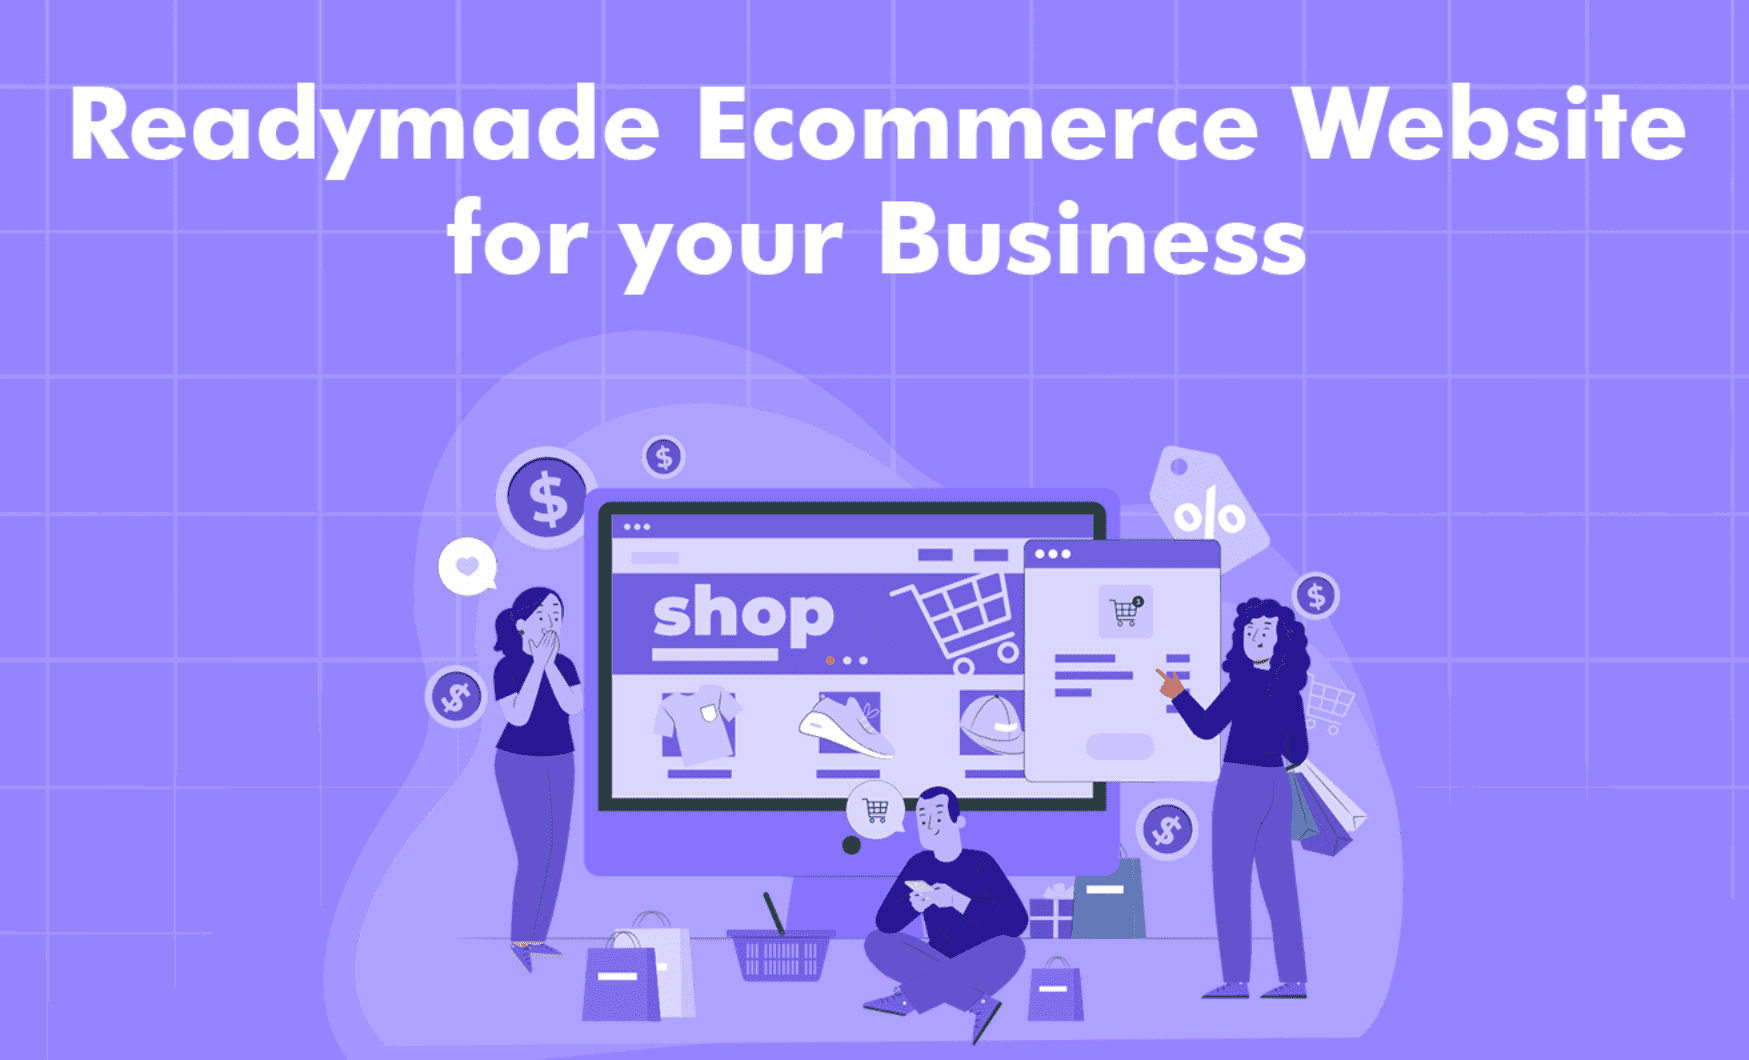 Readymade ecommerce website for your business